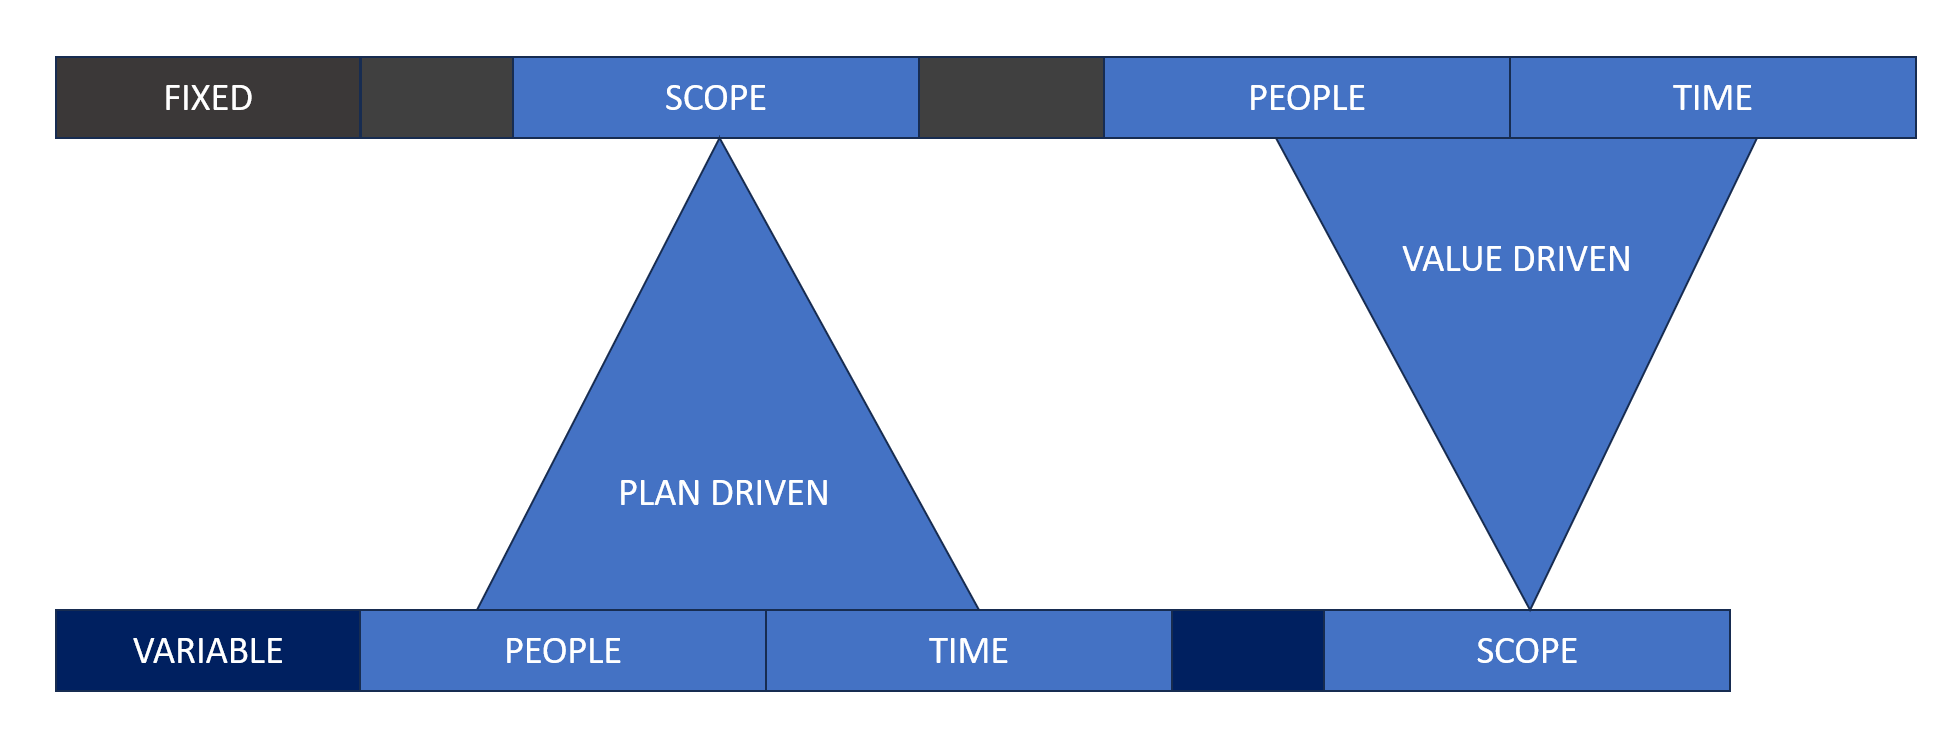 Value vs Plan Driven Fixed vs Variable considerations to each delivery methodology